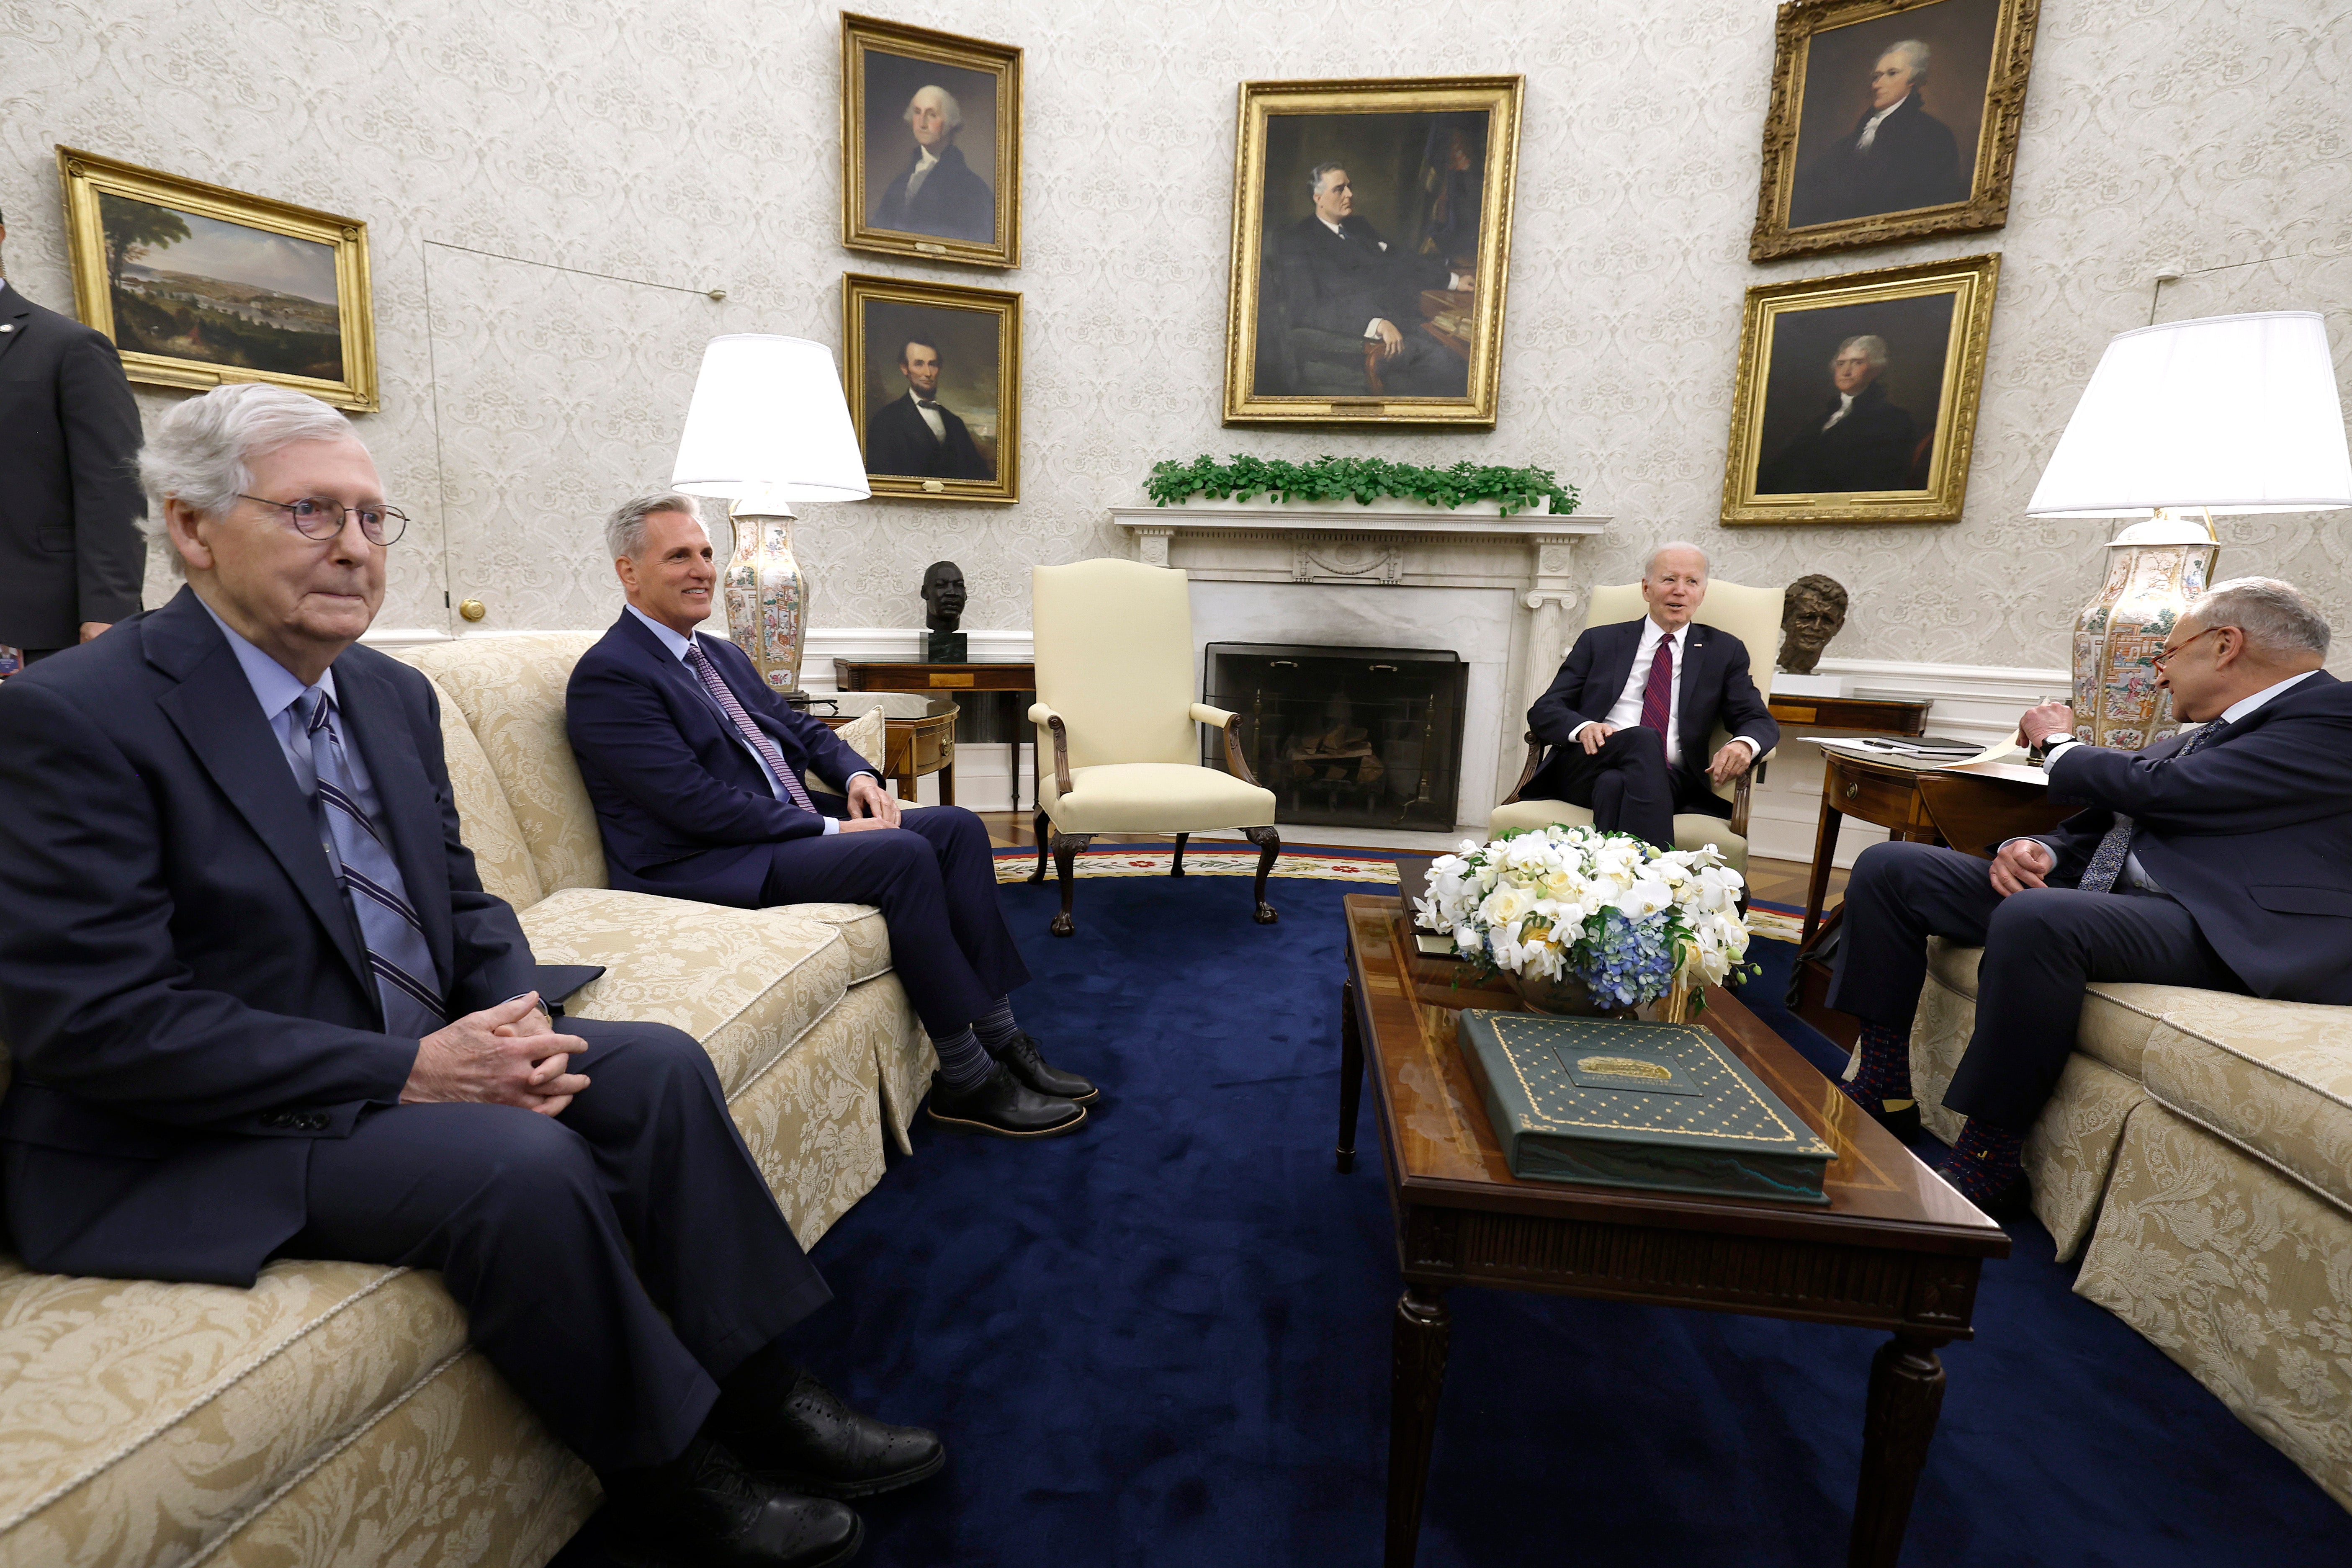 U.S. Senate Minority Leader Mitch McConnell (R-KY), Speaker of the House Kevin McCarthy (R-CA), President Joe Biden, and Senate Majority Leader Chuck Schumer (D-NY) meet in the Oval Office of the White House on May 09, 2023 in Washington, DC. The Congressional lawmakers met with the President to negotiate how to address the debt ceiling before June 1, when U.S. Treasury Secretary Janet Yellen warned Congress that the United States would default on their debts. (Photo by Anna Moneymaker/Getty Images)